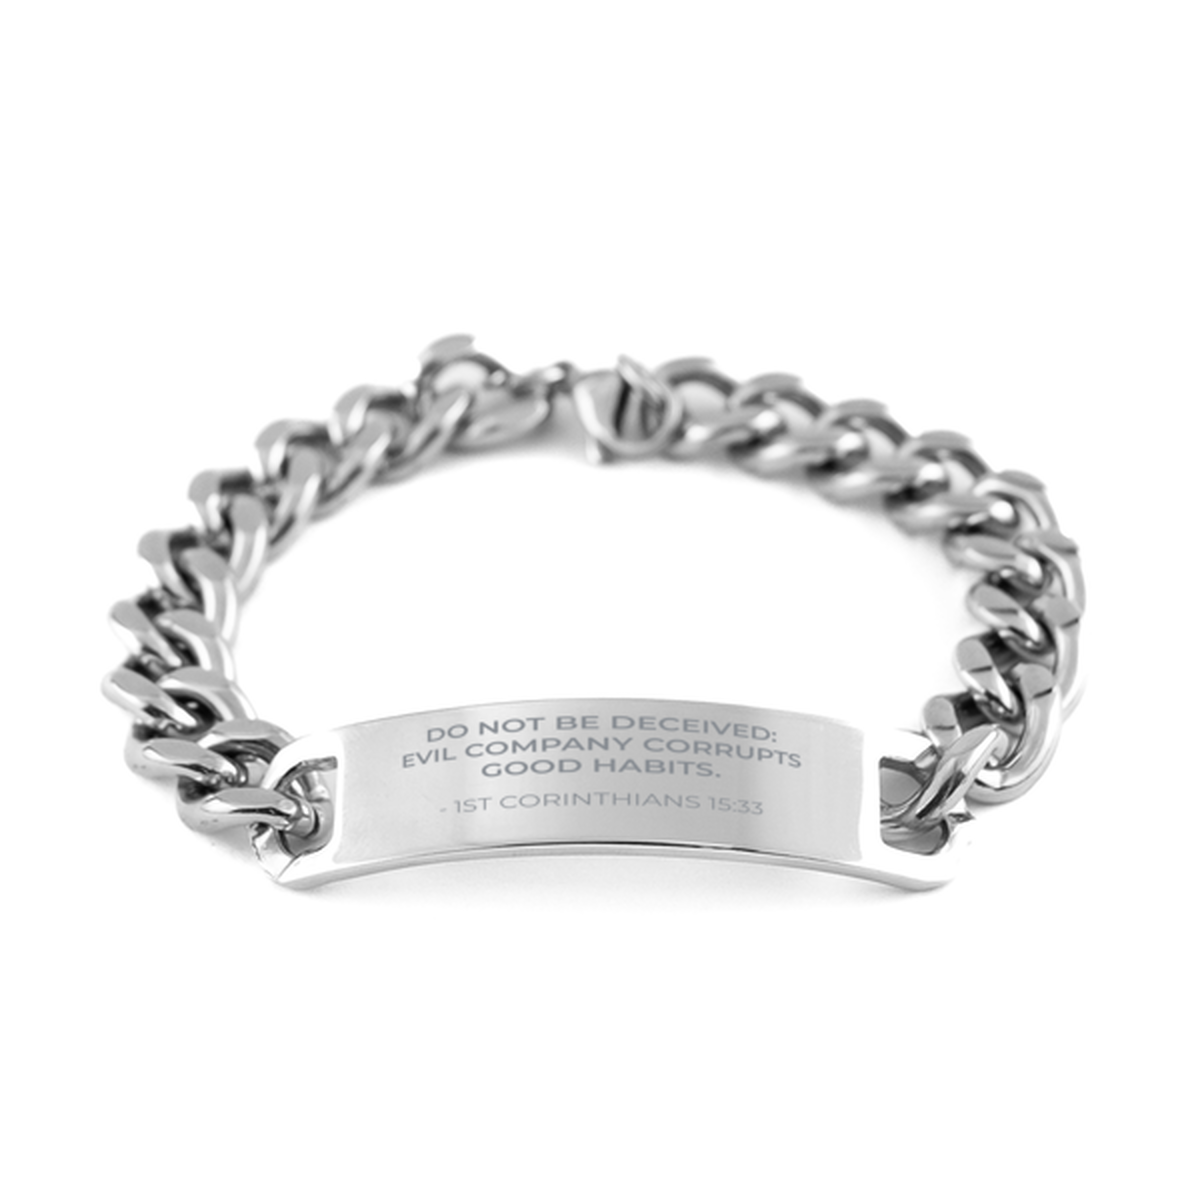 Bible Verse Chain Stainless Steel Bracelet, 1St Corinthians 15:33 Do Not Be Deceived: Evil Company Corrupts Good, Inspirational Christian Gifts For Men Women